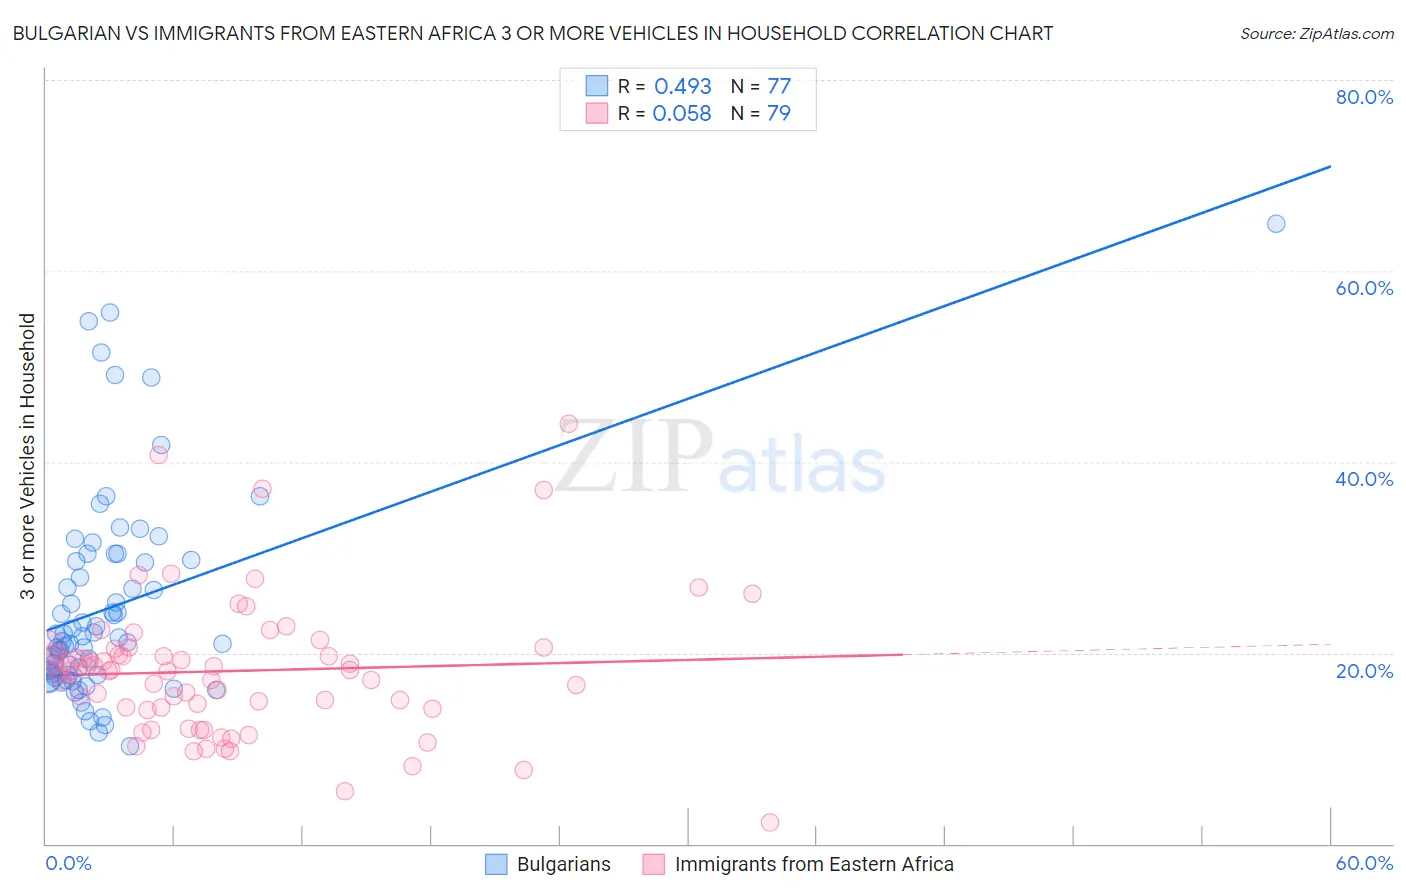 Bulgarian vs Immigrants from Eastern Africa 3 or more Vehicles in Household